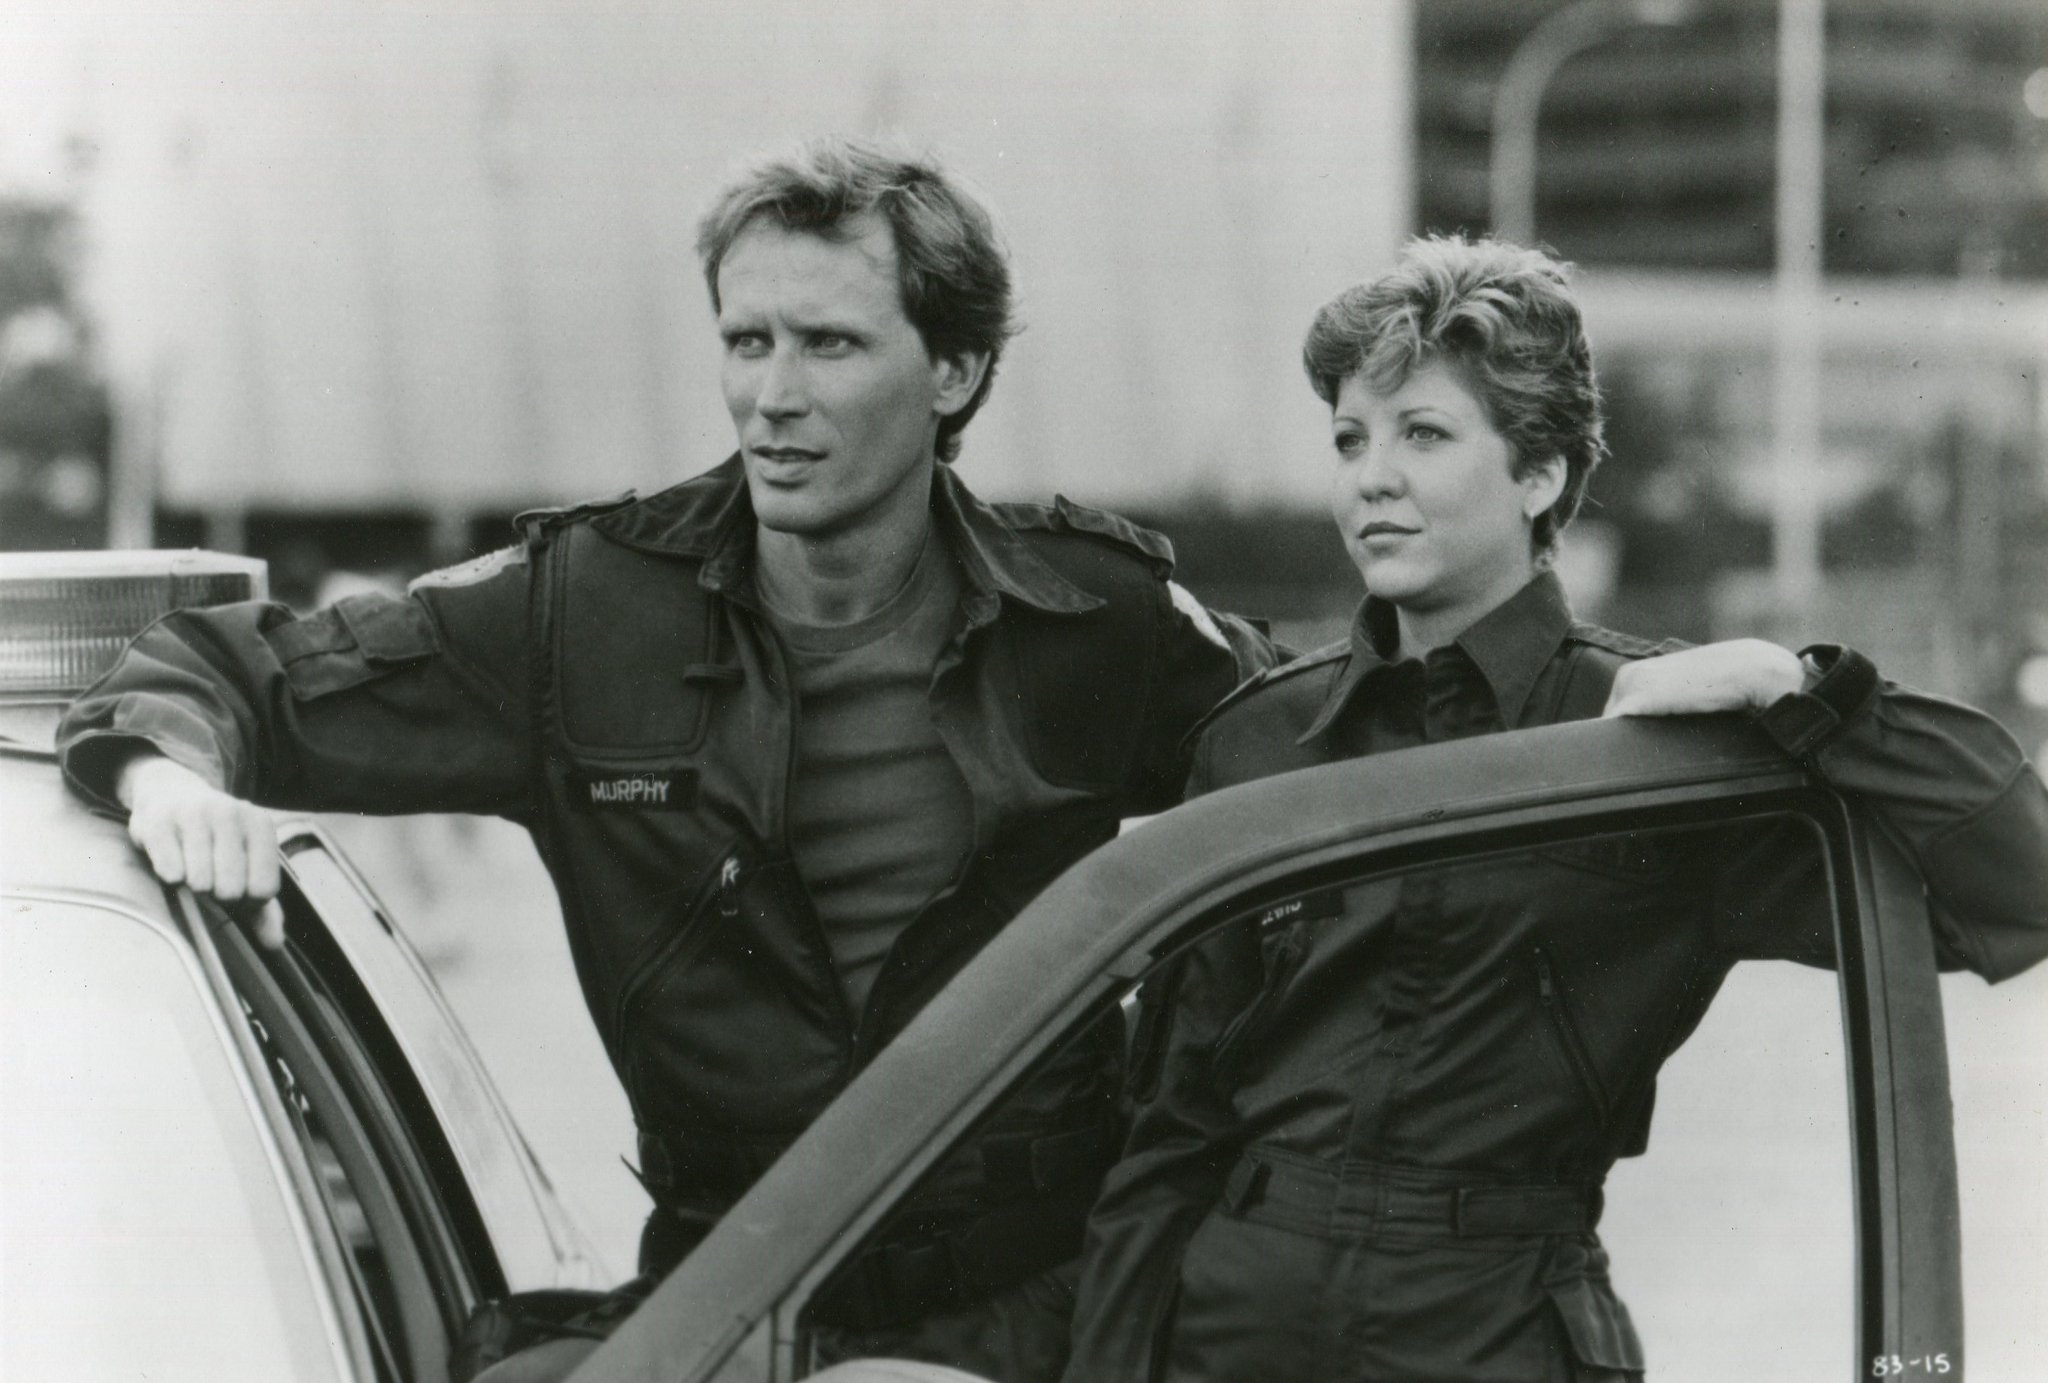 Good morning to all and a happy birthday to BOTH Nancy Allen and Peter Weller. 